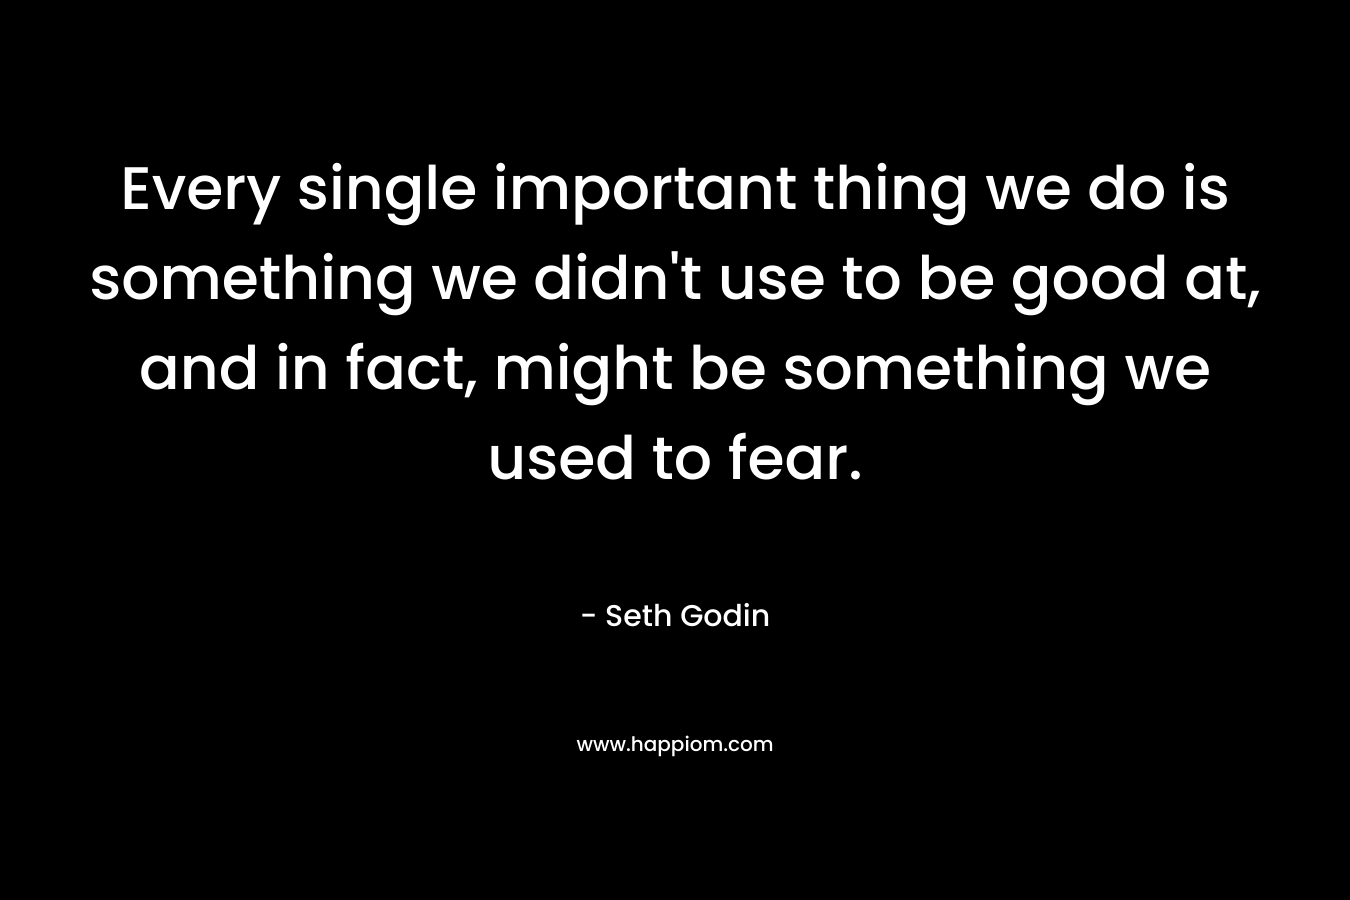 Every single important thing we do is something we didn't use to be good at, and in fact, might be something we used to fear.